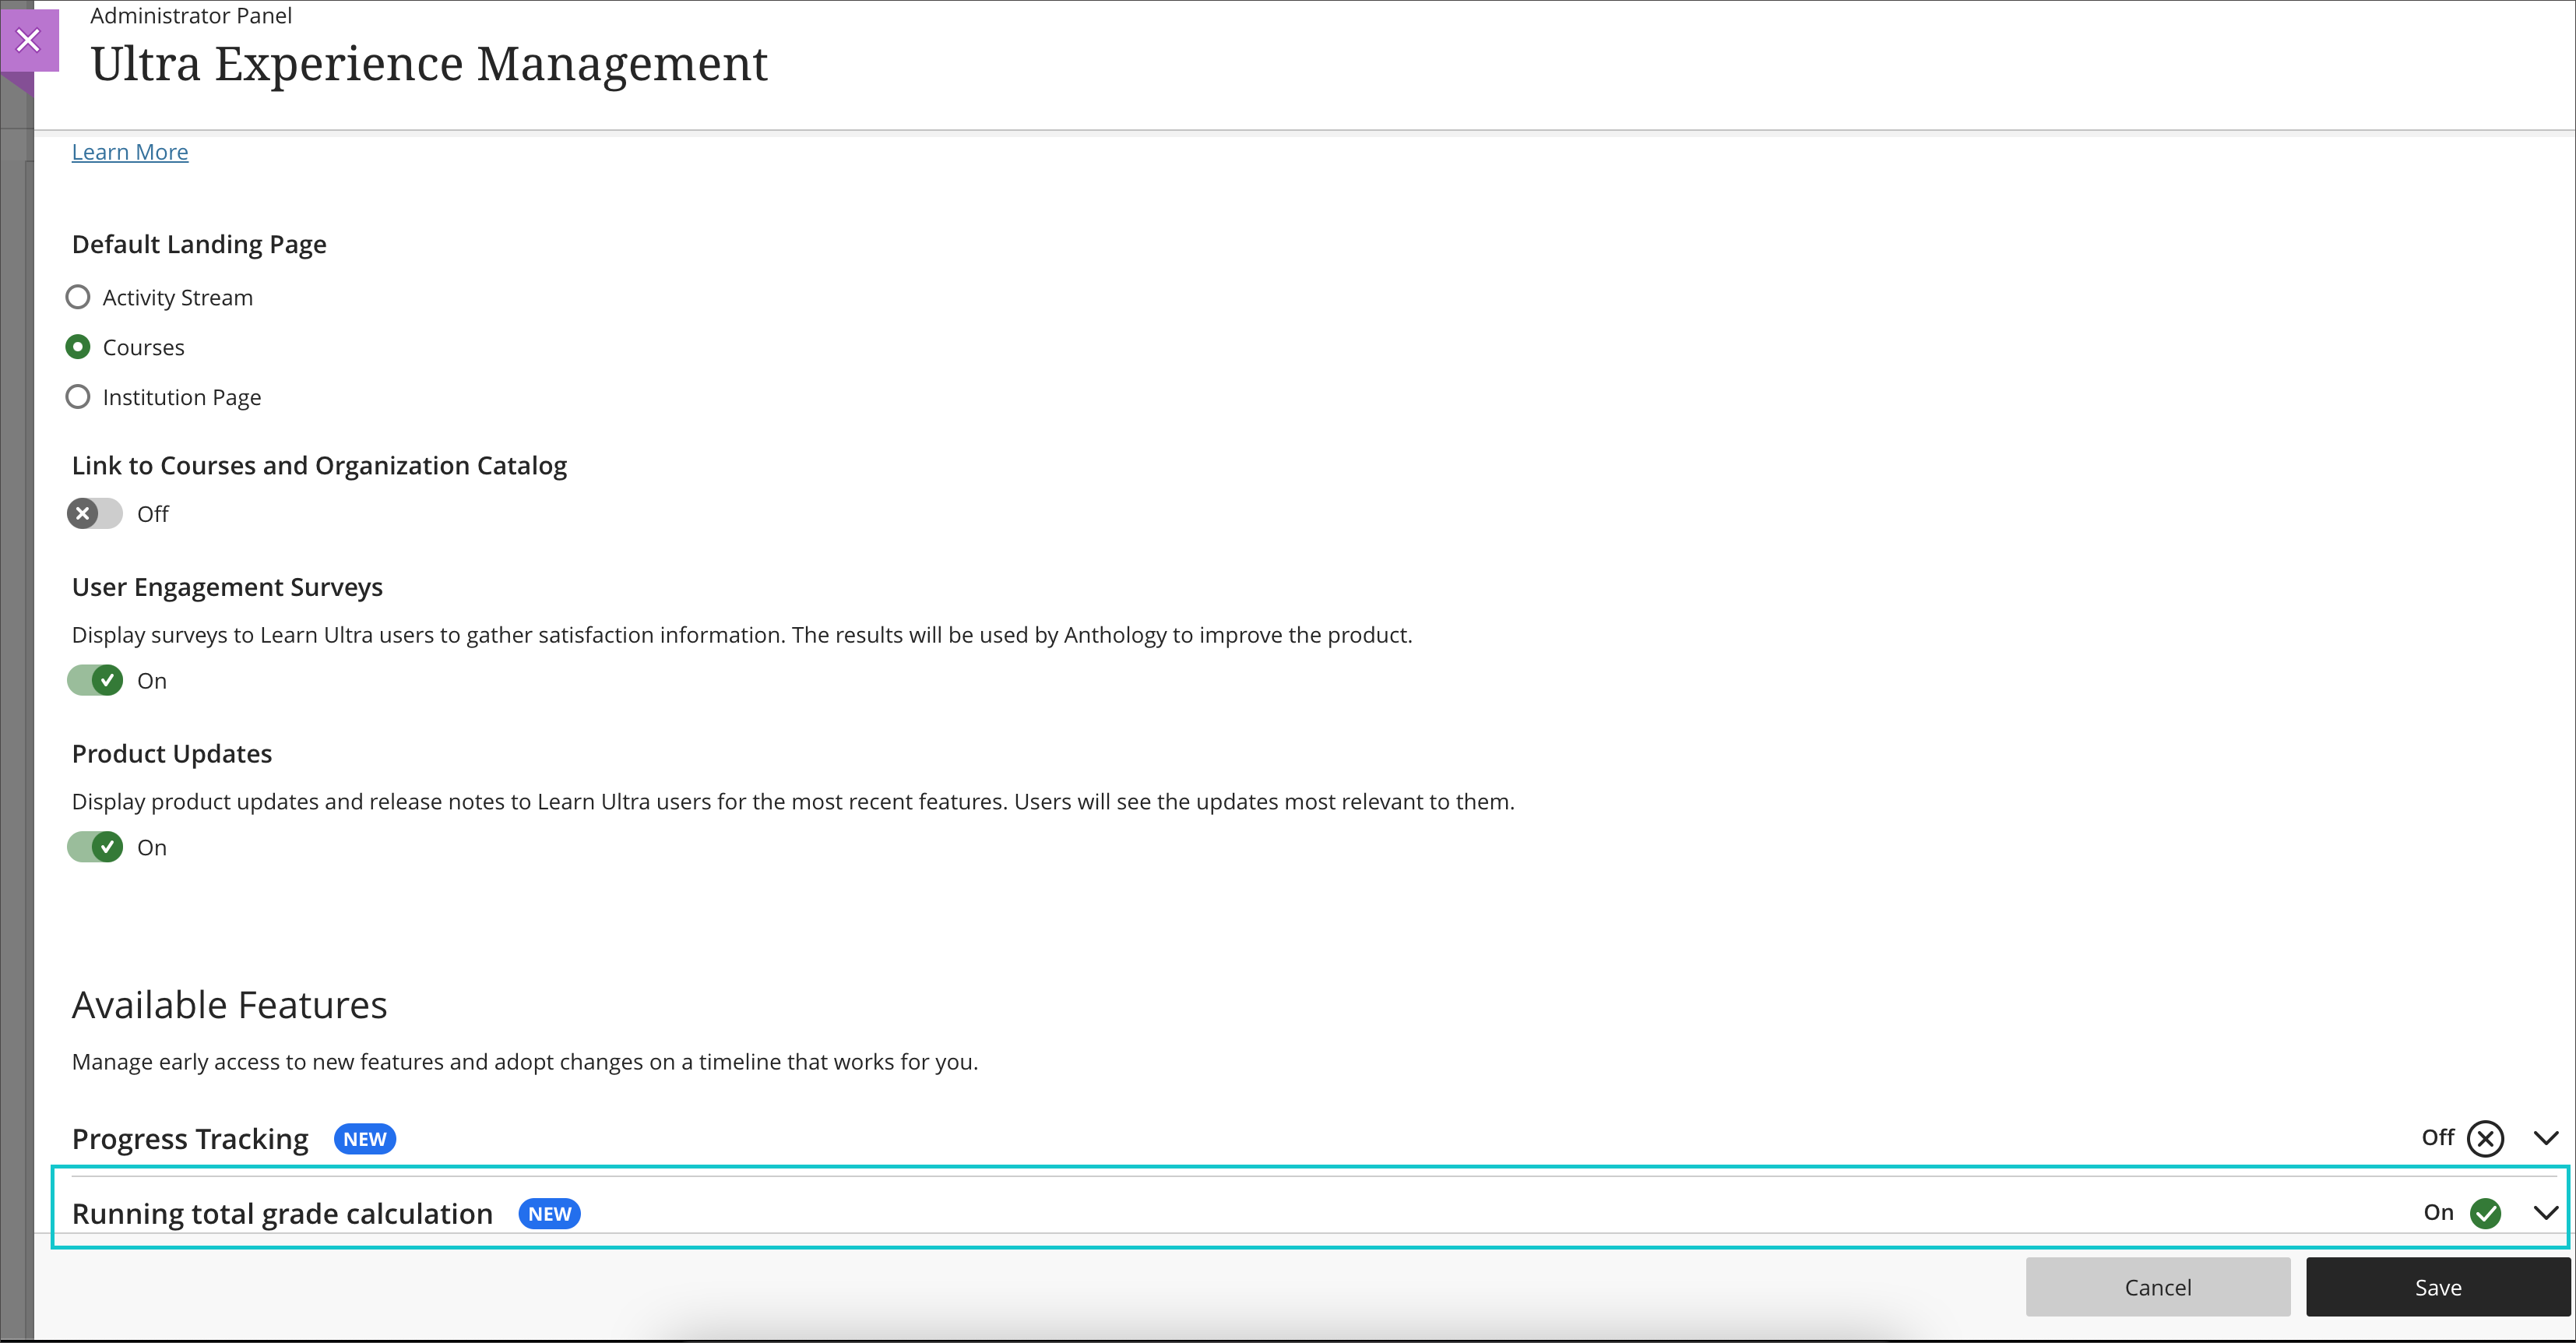 Administrator view to configure the feature